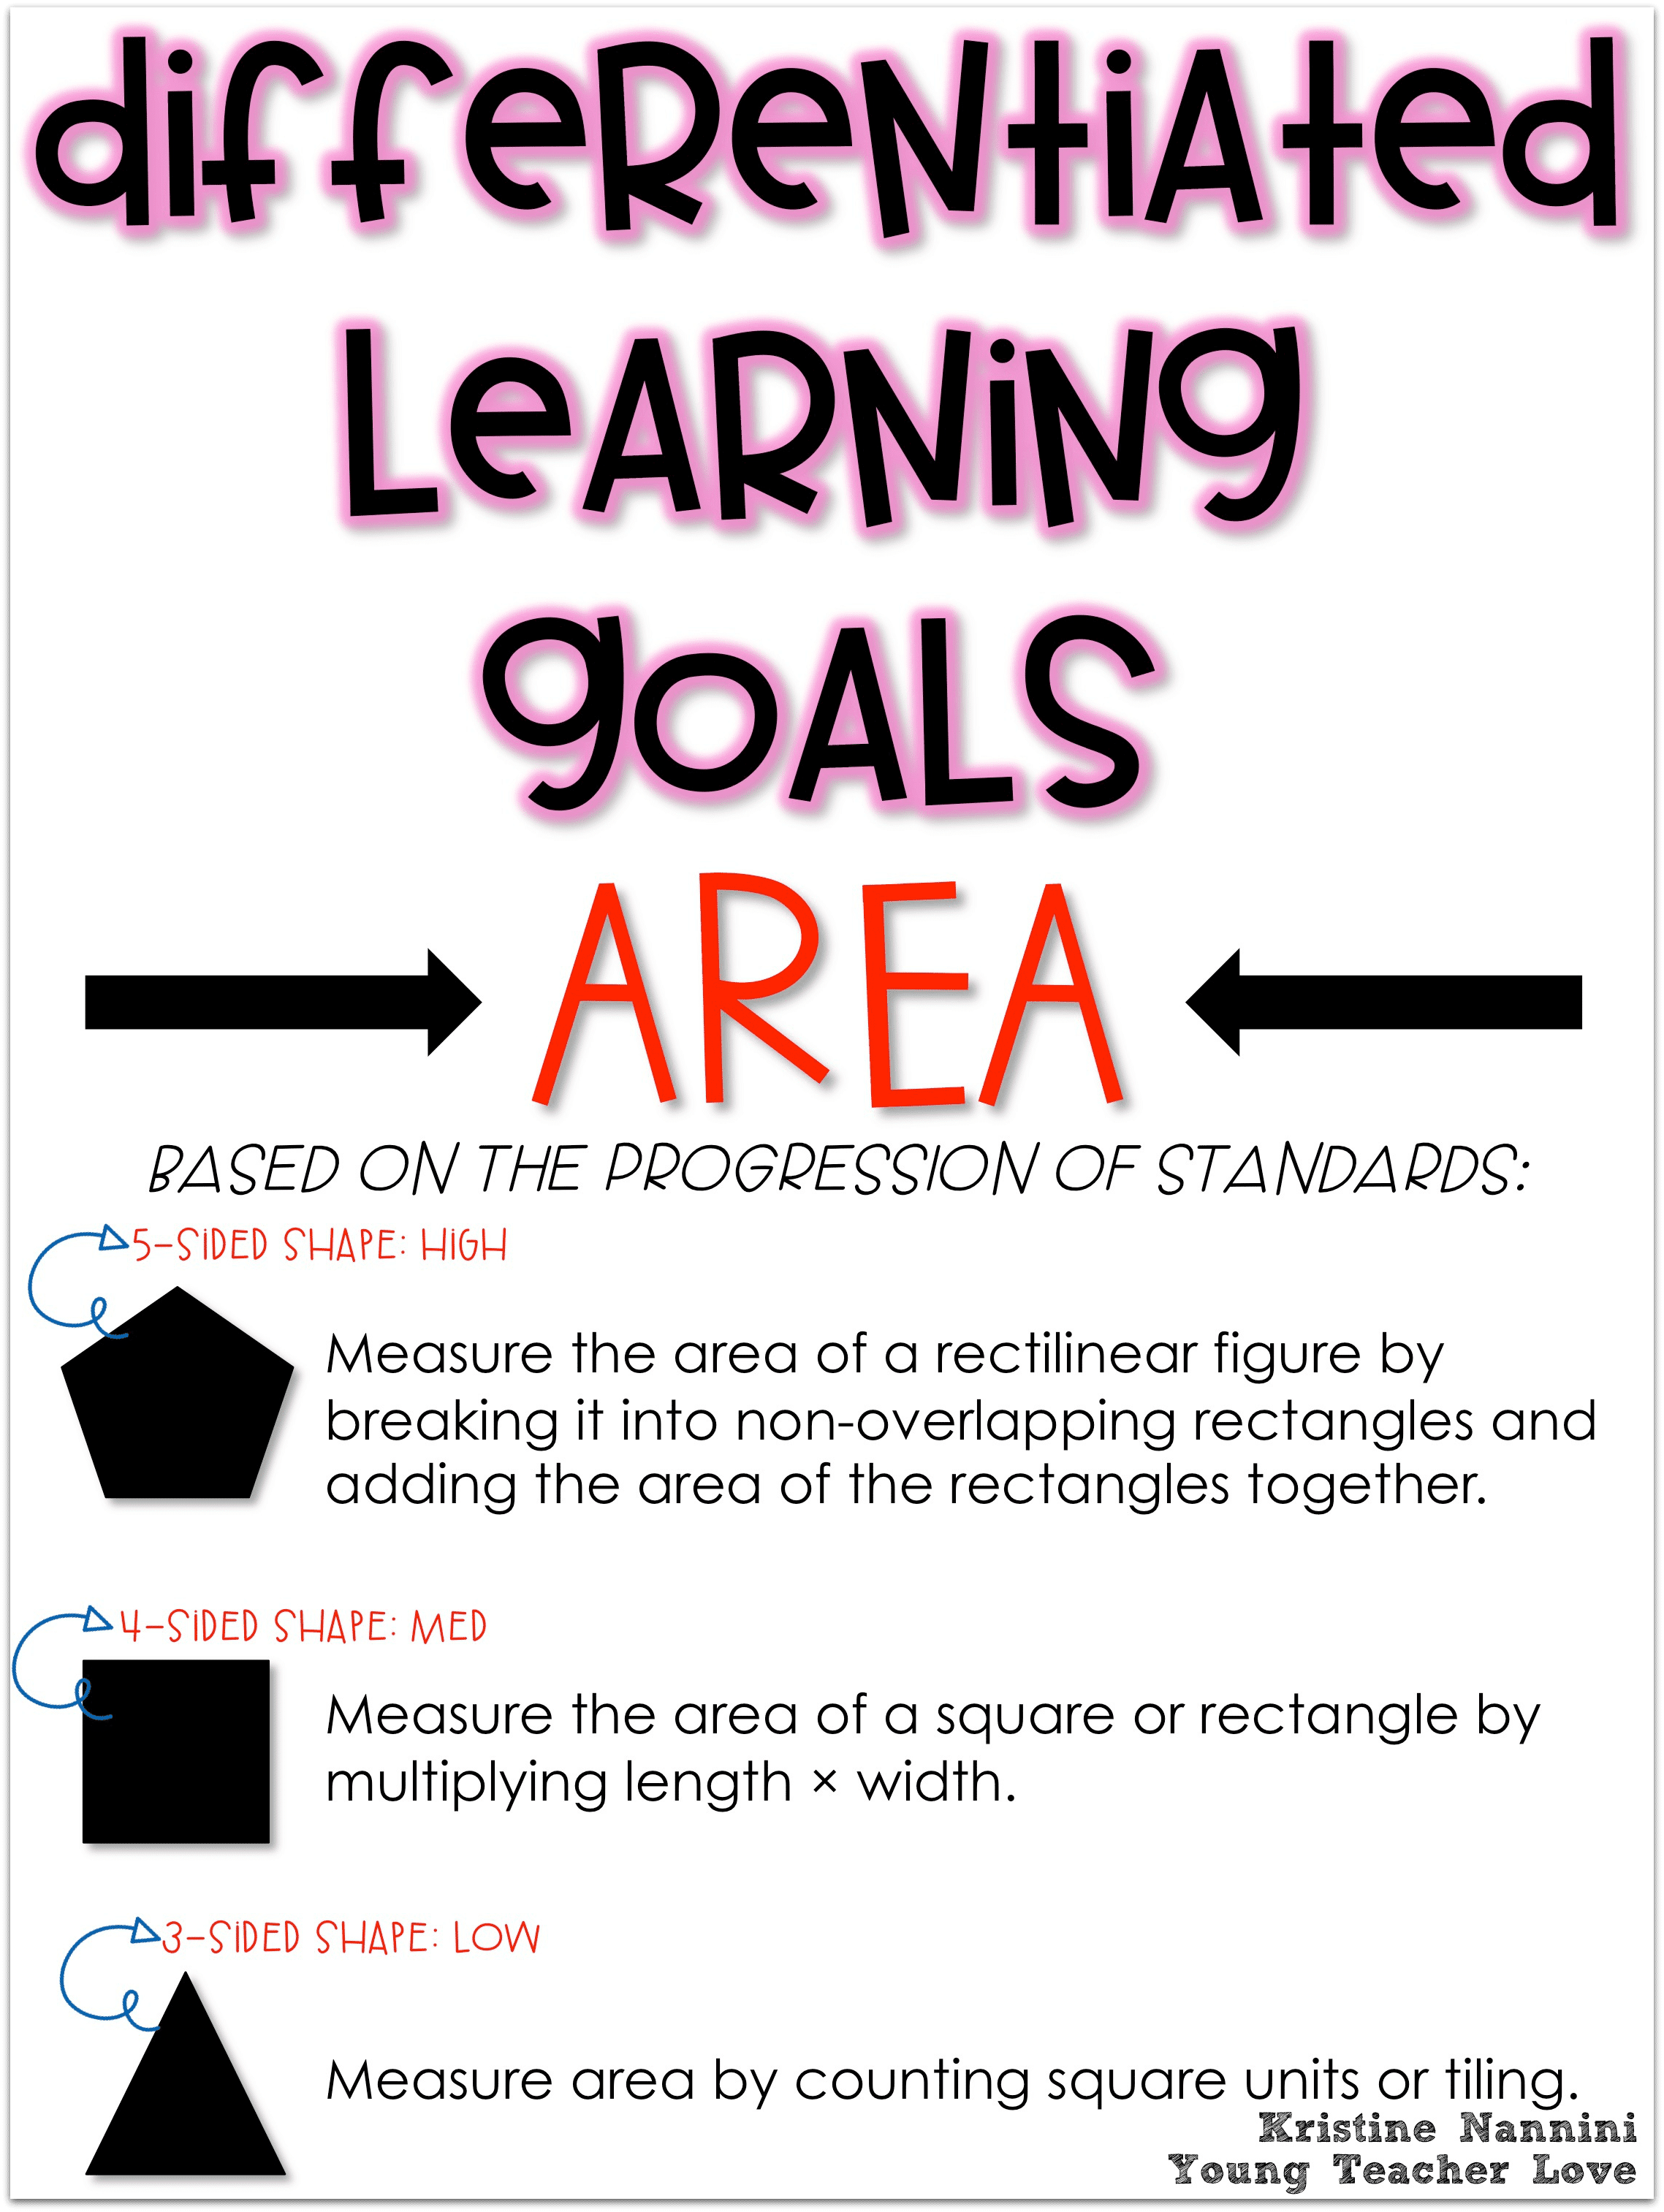 Differentiated Learning Goals for Teaching Area. VERY HELPFUL! - Young Teacher Love by Kristine Nannini